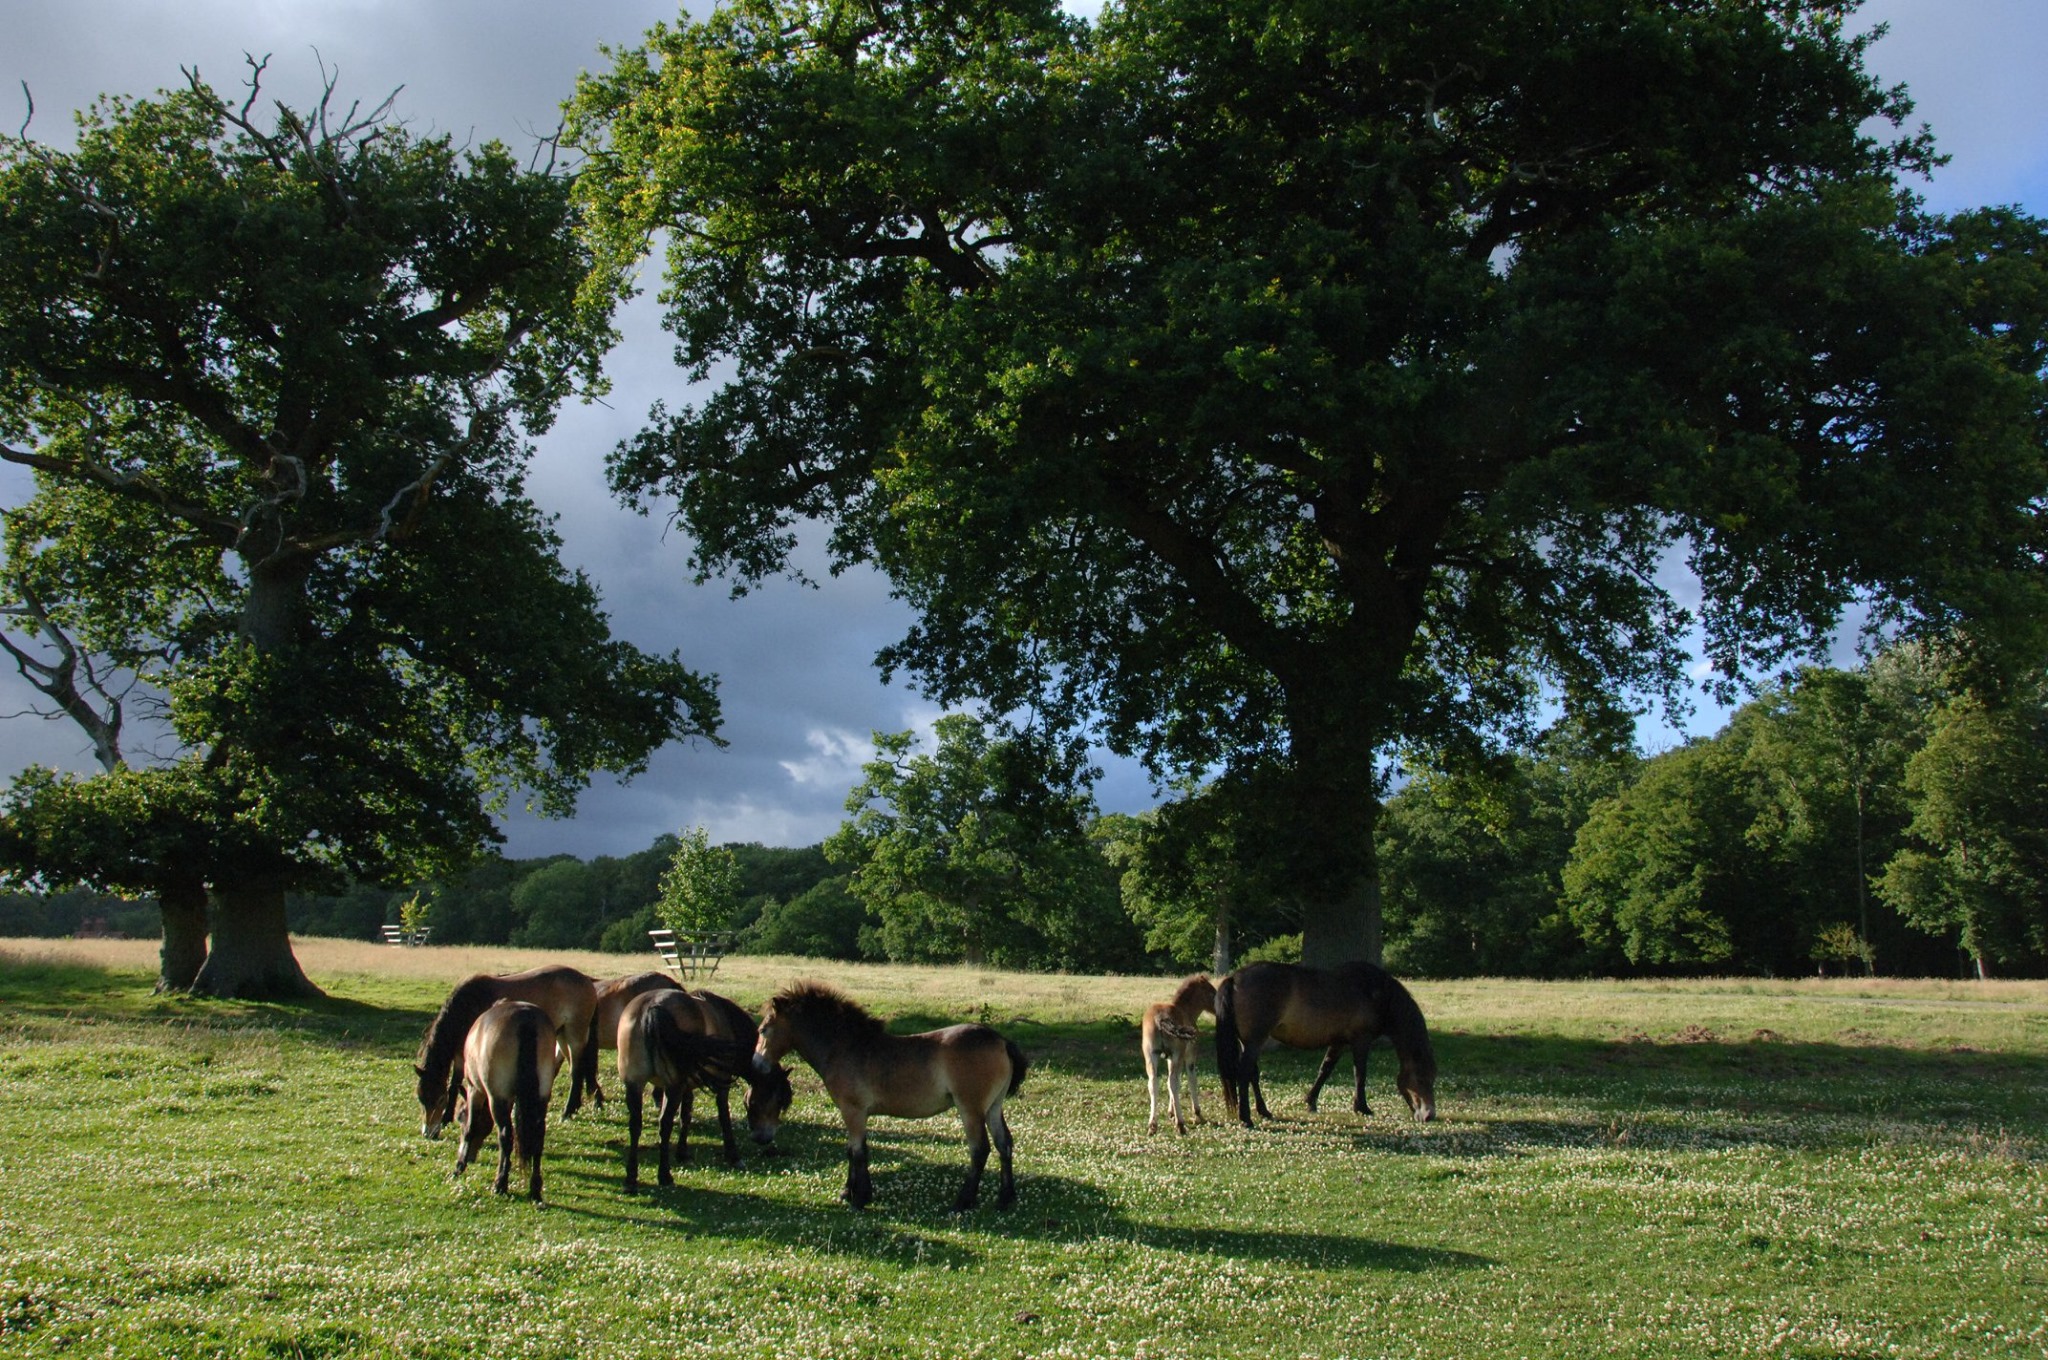 One function that grazing animals would have performed in the past is the transference of nutrients across the landscape. Each animal has different plant associations. Herds of Longhorn Cattle, Exmoor Ponies, Tamworth Pigs, Red Deer, Fallow Deer and Roe Deer all roam free at Knepp.